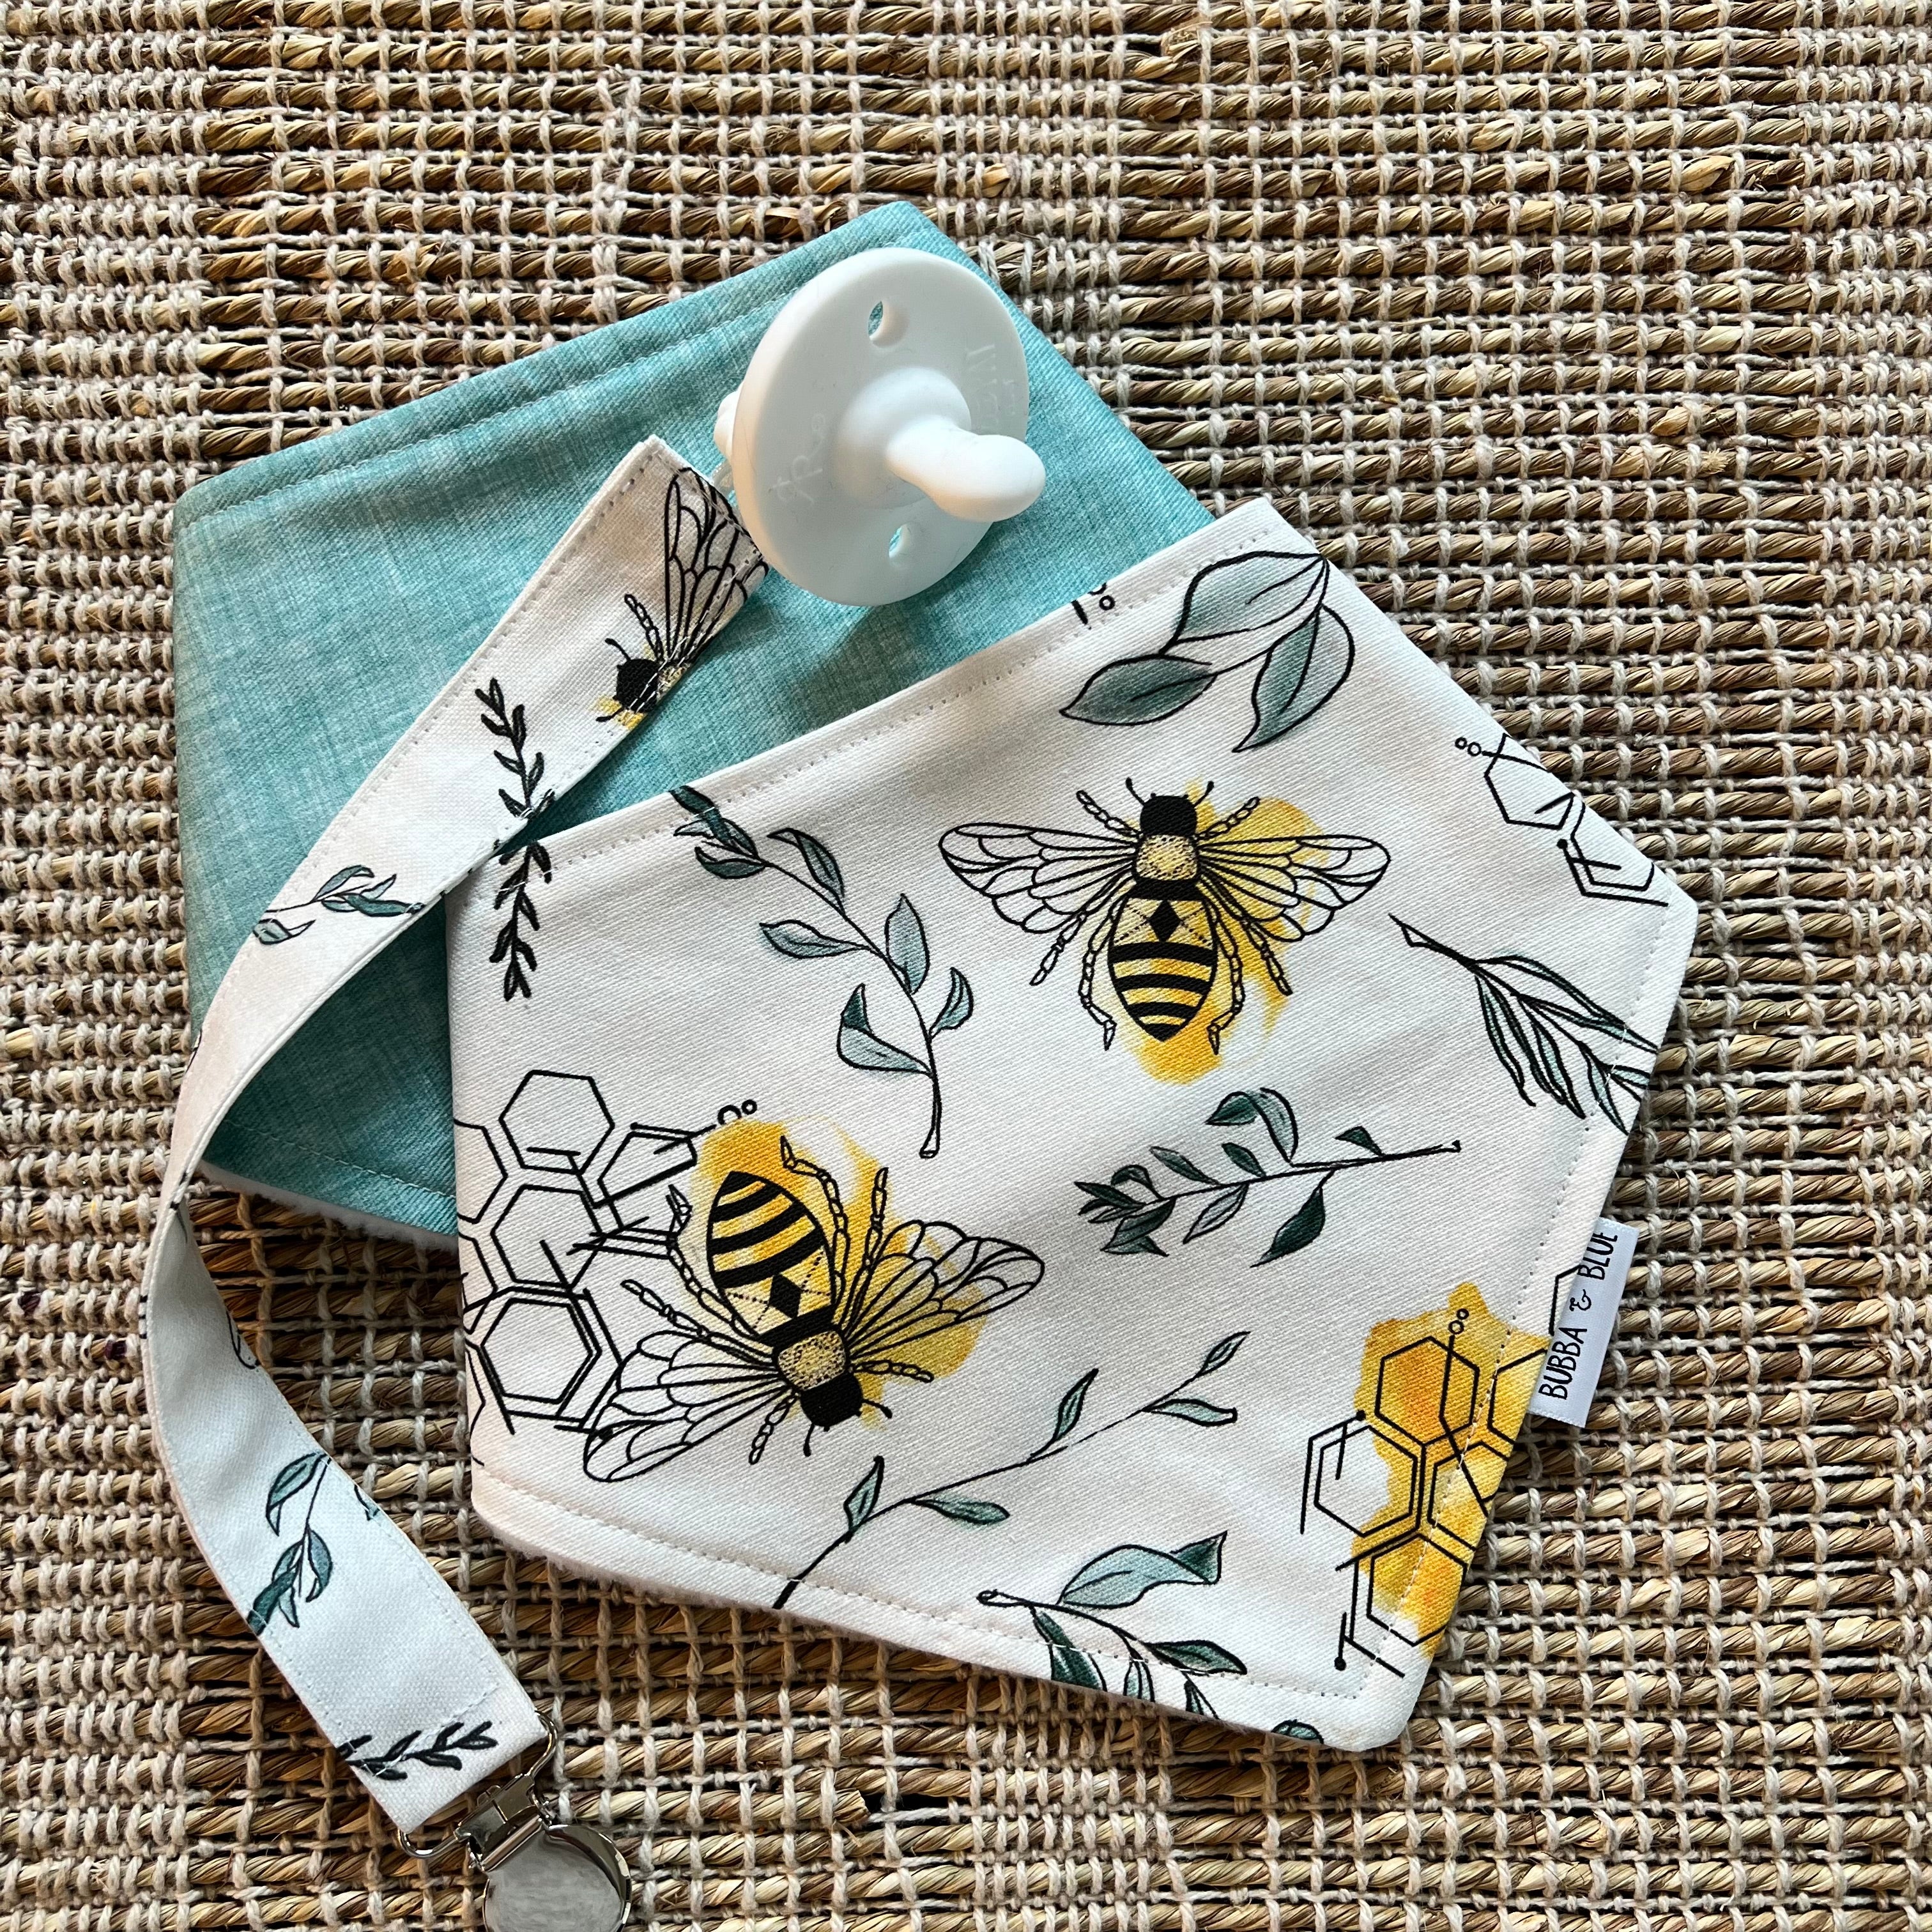 Bib and soother clip set in bees